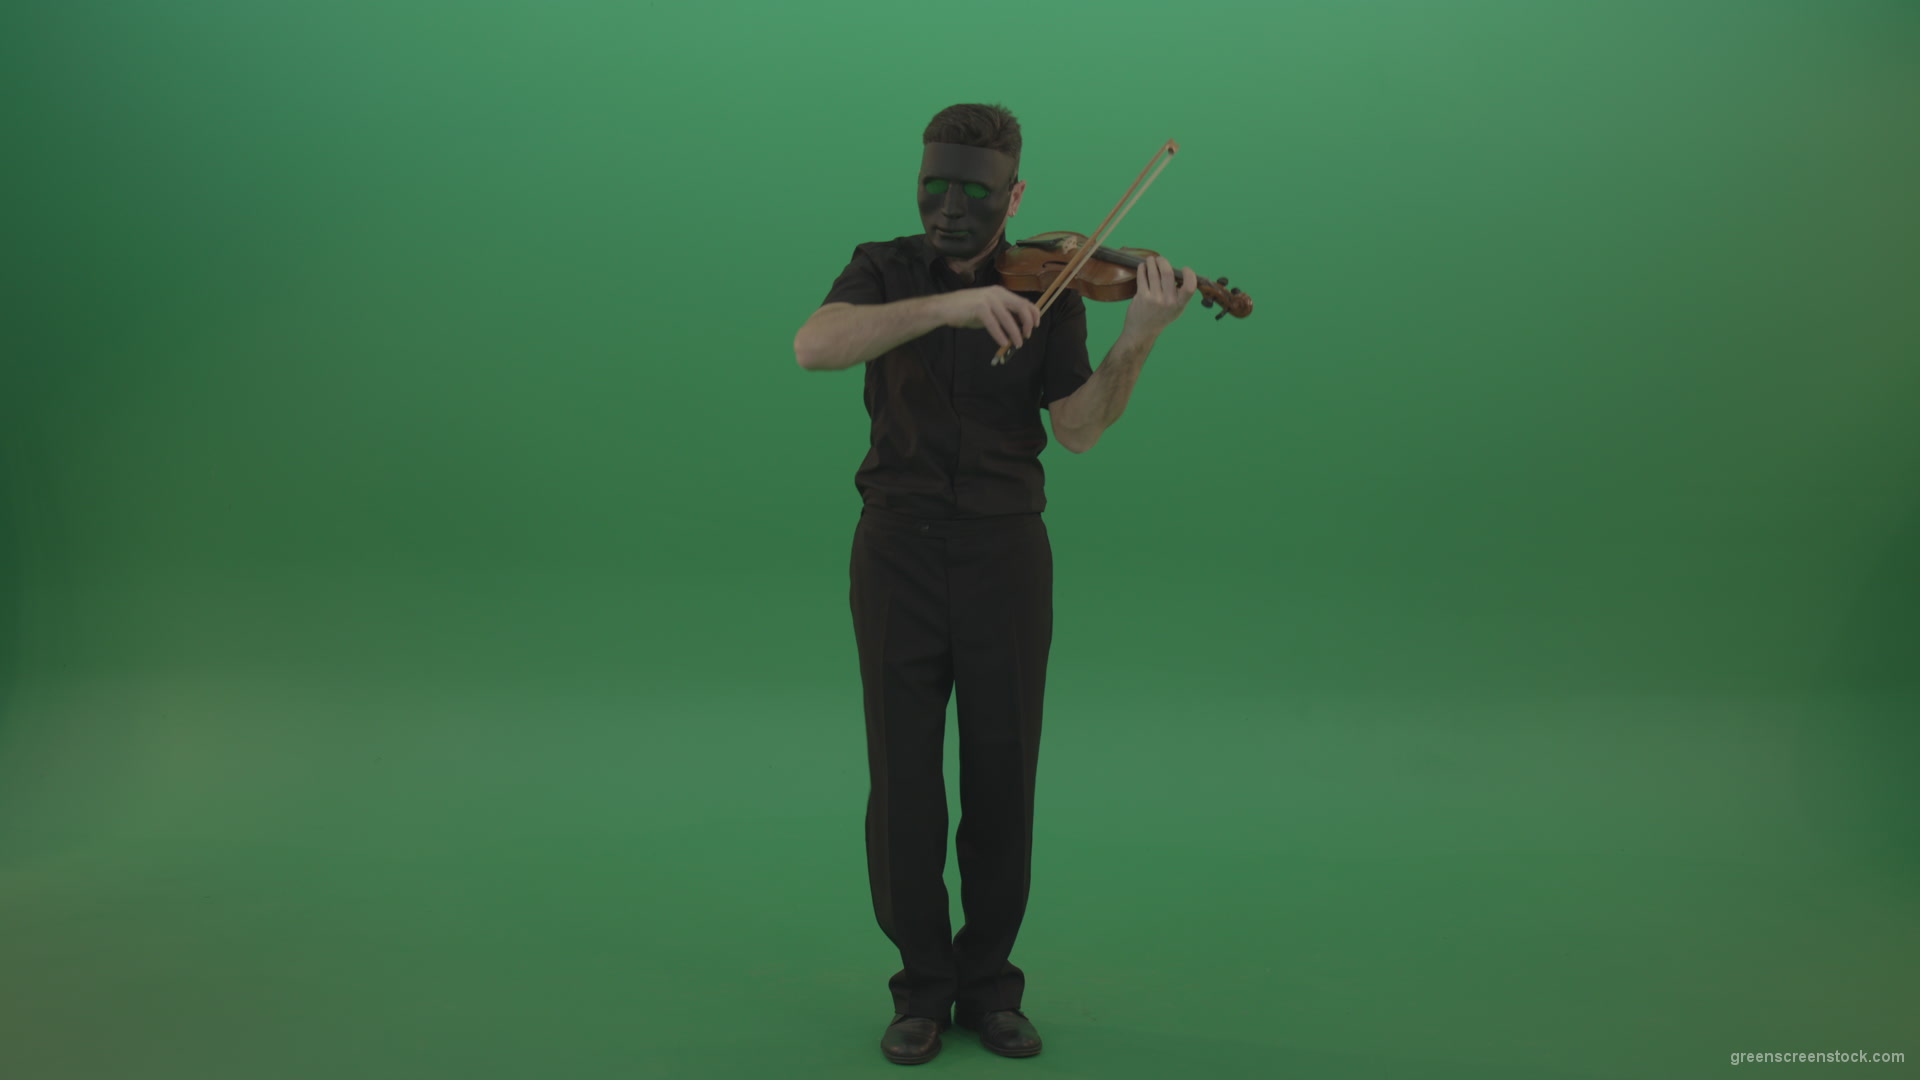 Full-height-Rock-Man-in-black-wear-and-mask-play-violin-fiddle-strings-gothic-dark-music-isolated-on-green-screen_007 Green Screen Stock